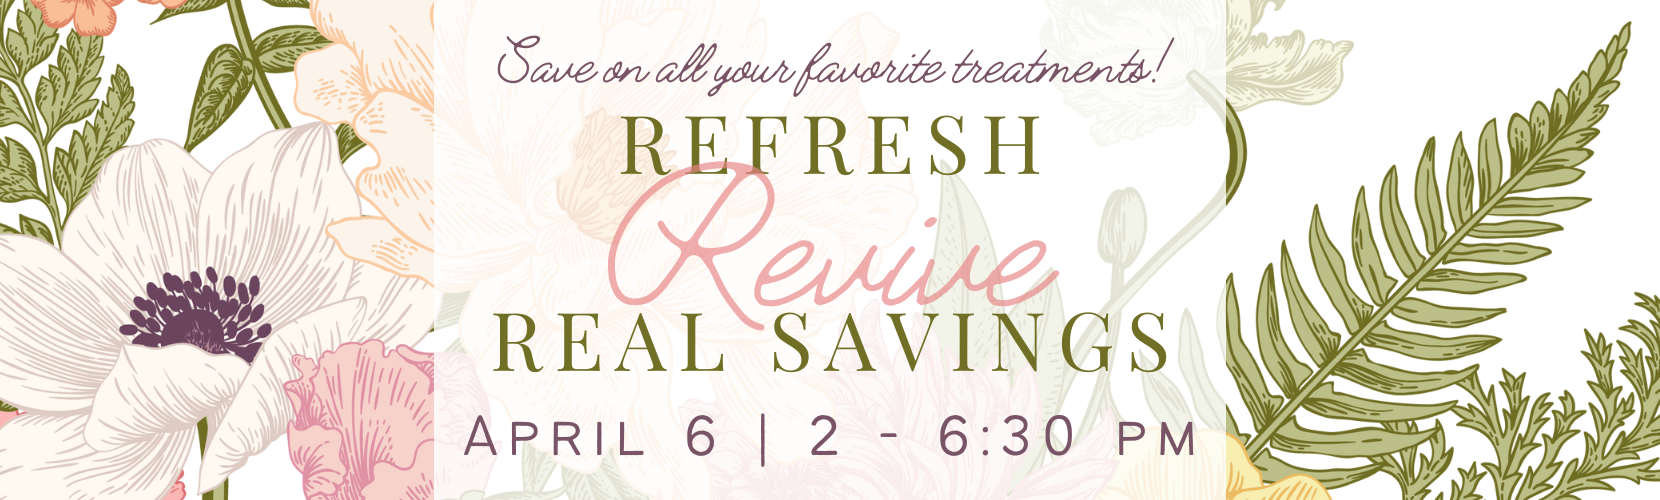 Spring Savings Event at Revive